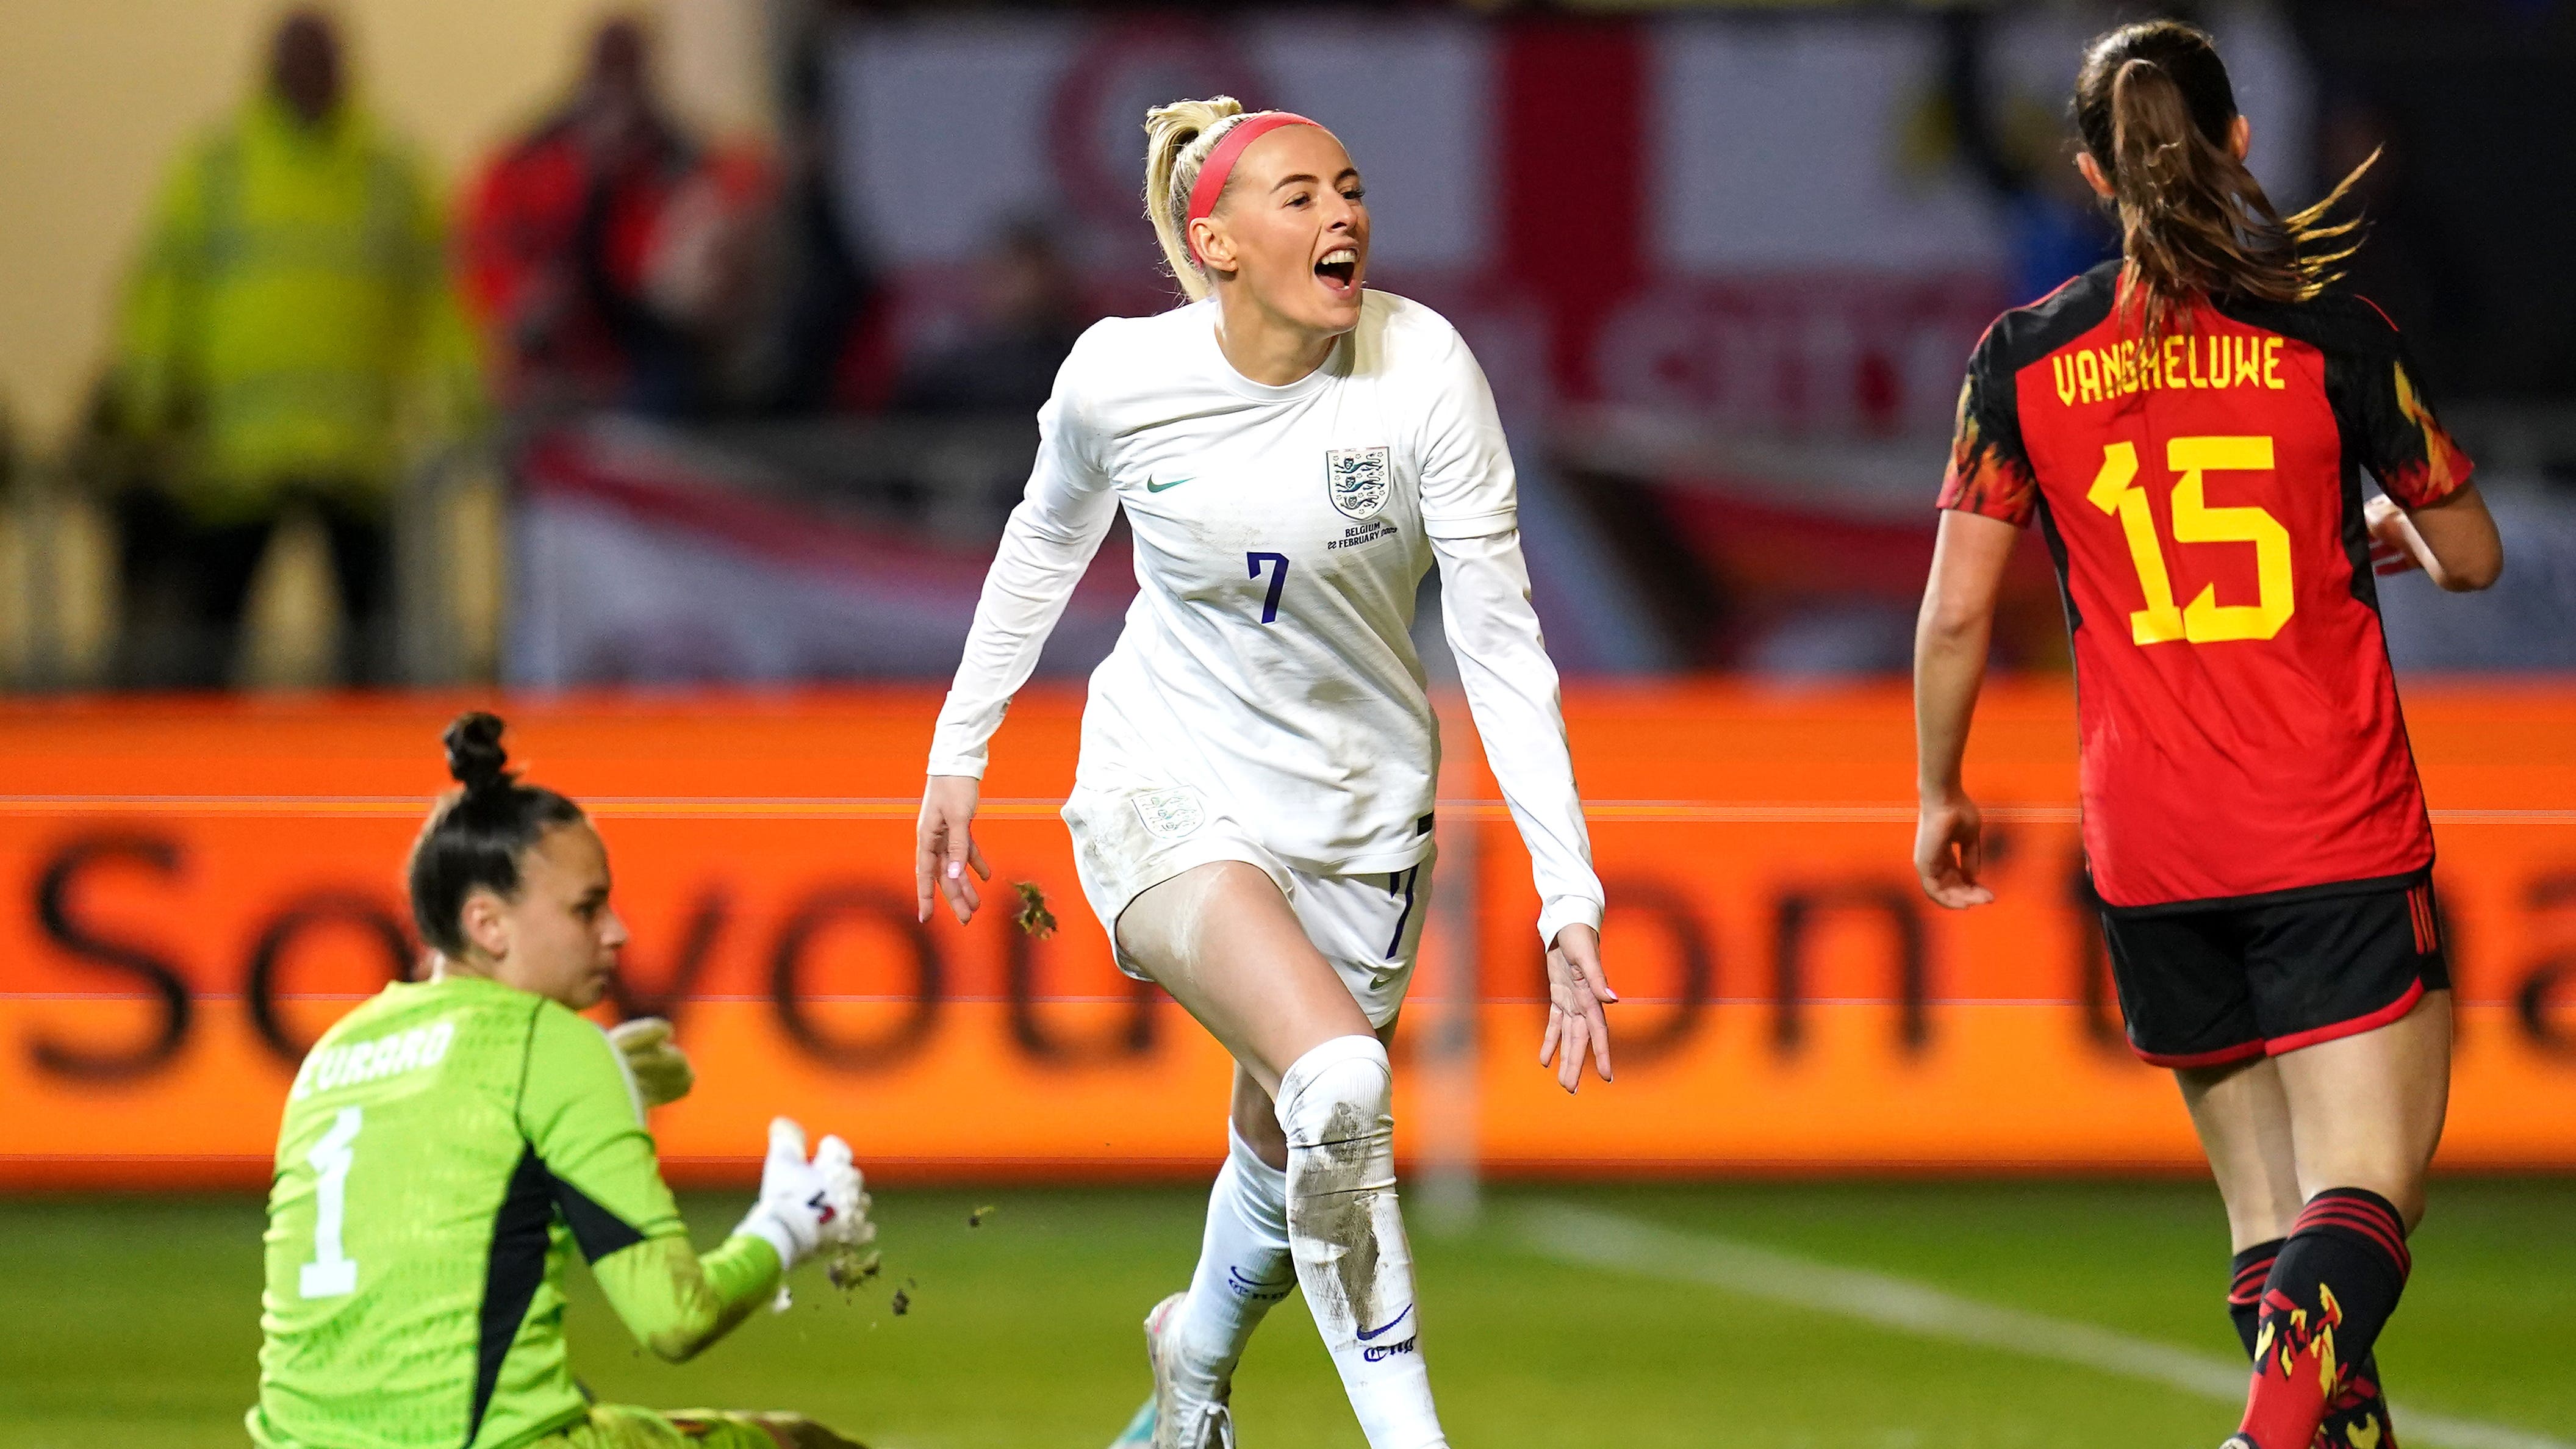 Chloe Kelly scored twice in England’s 6-1 win over Belgium to retain the Arnold Clark Cup (Nick Potts/PA)